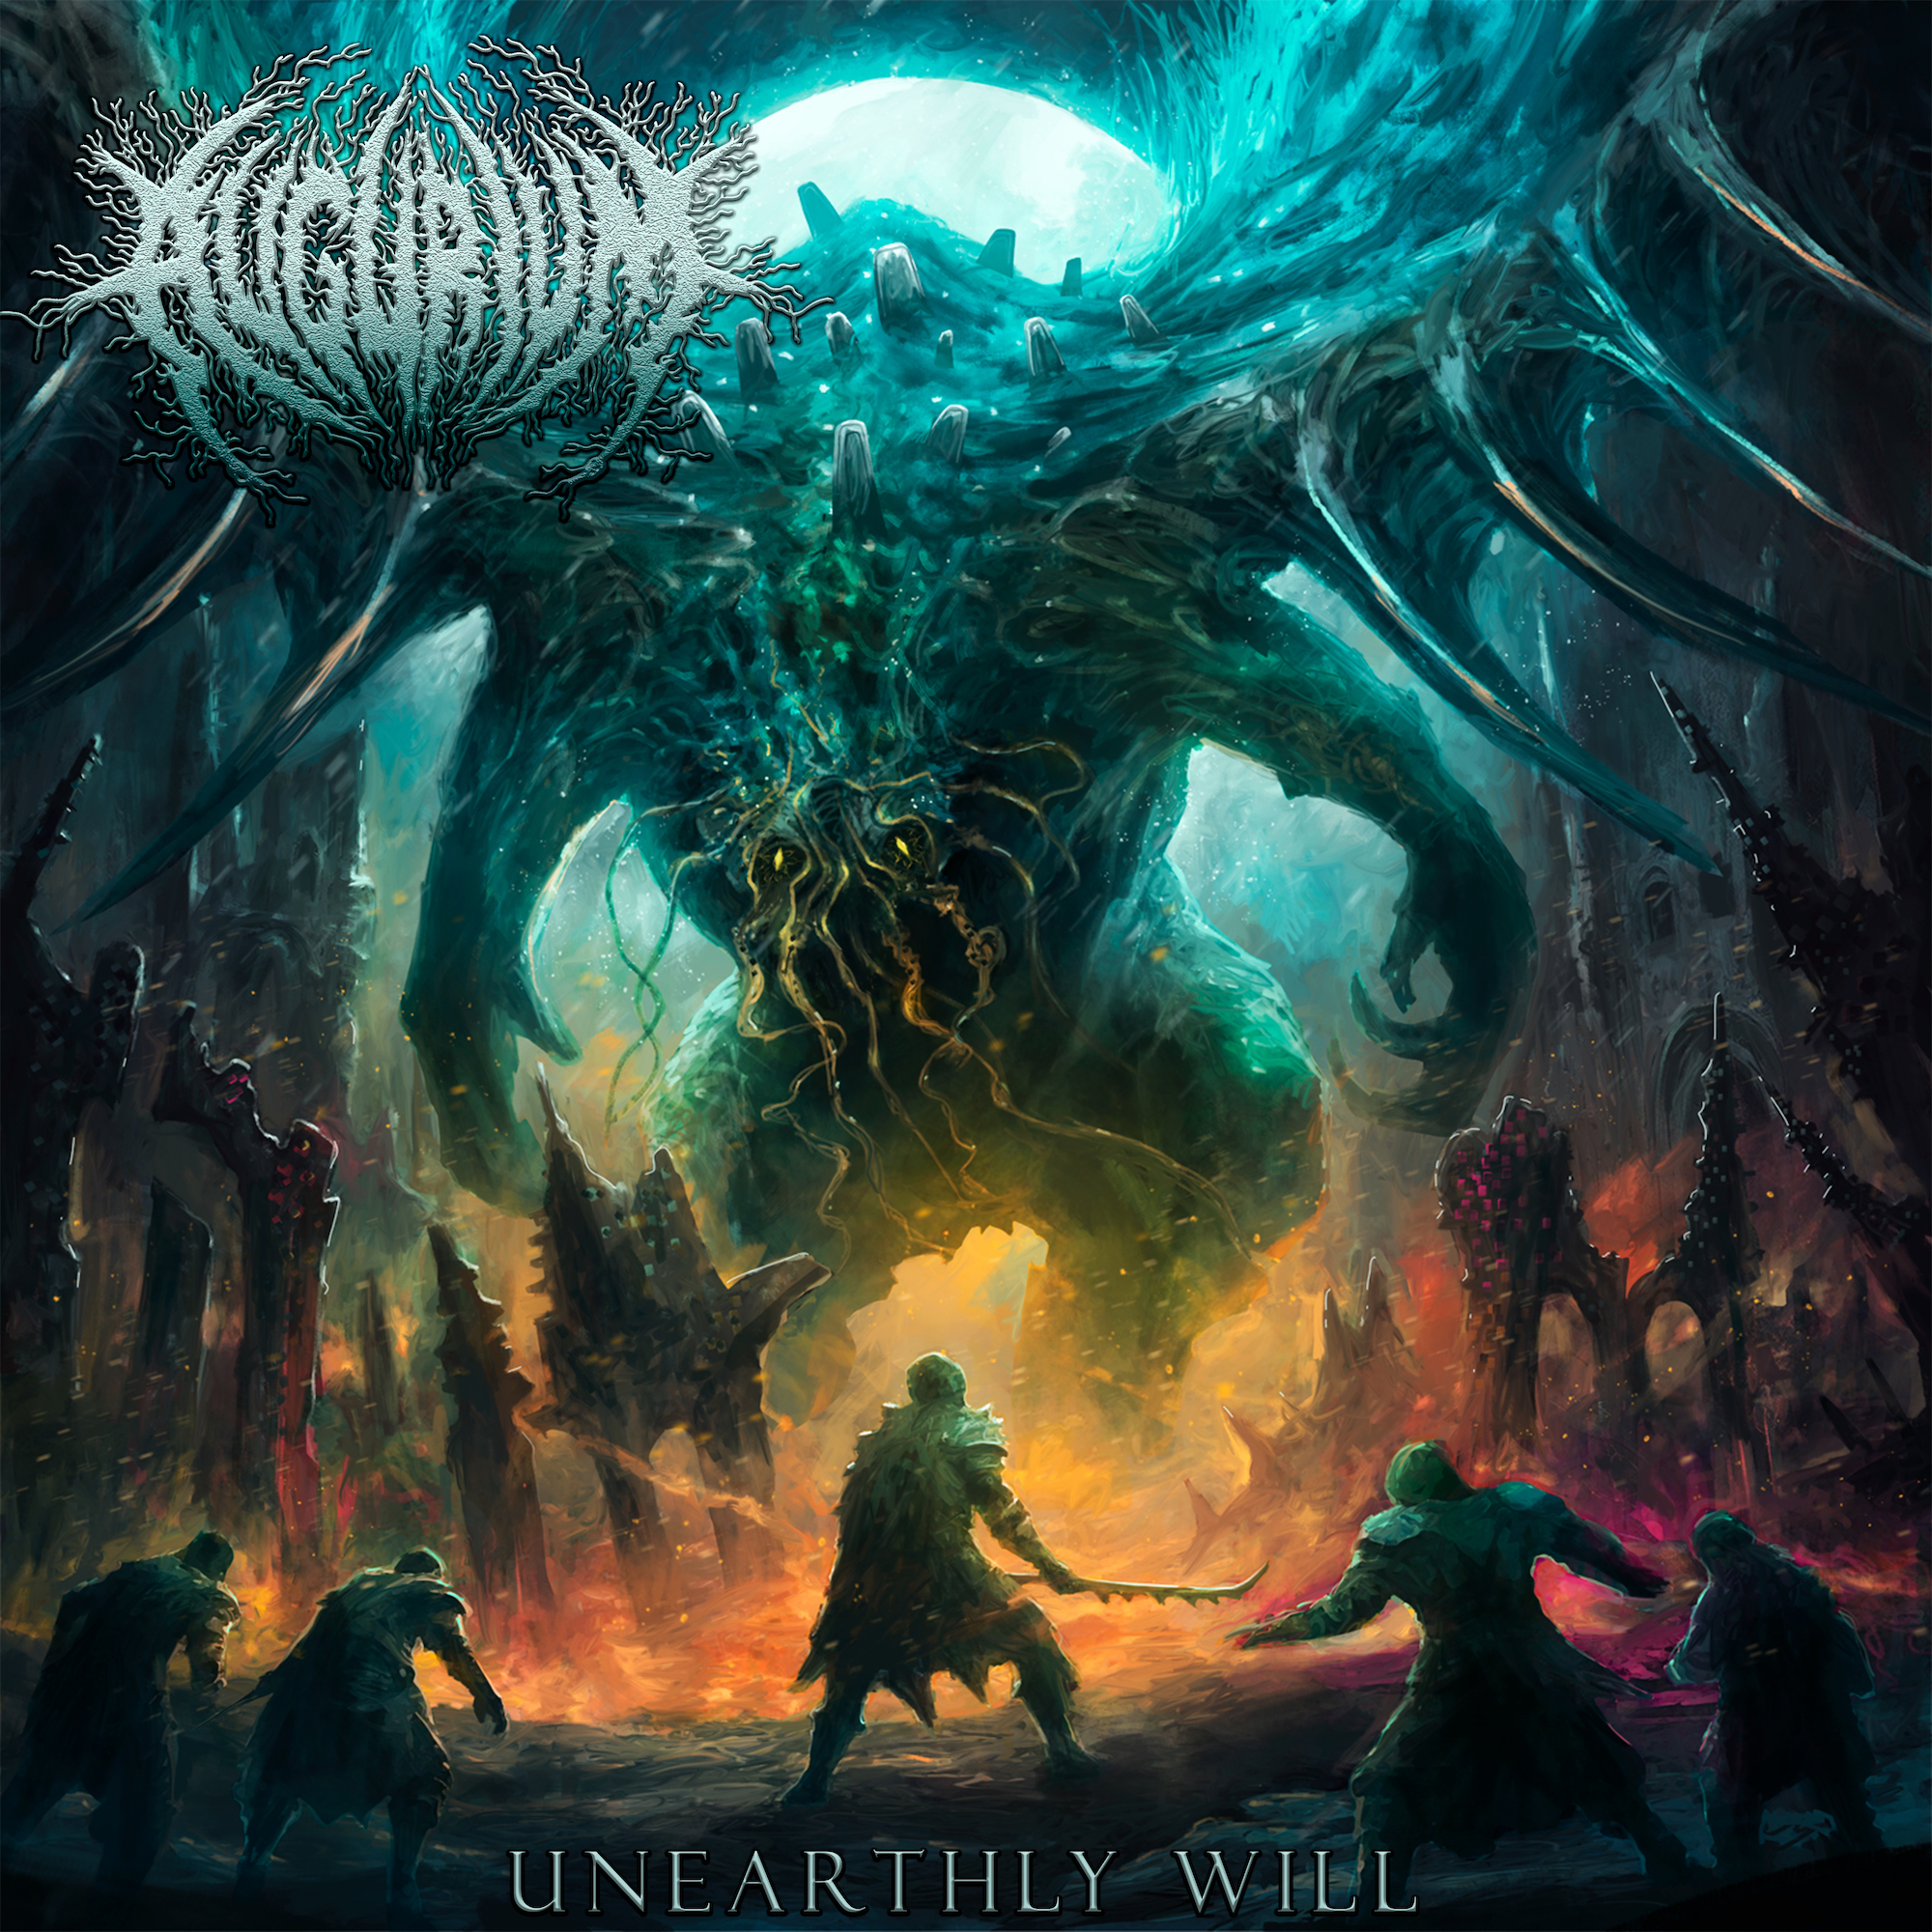 ALBUM REVIEW: Unearthly Will by Augurium